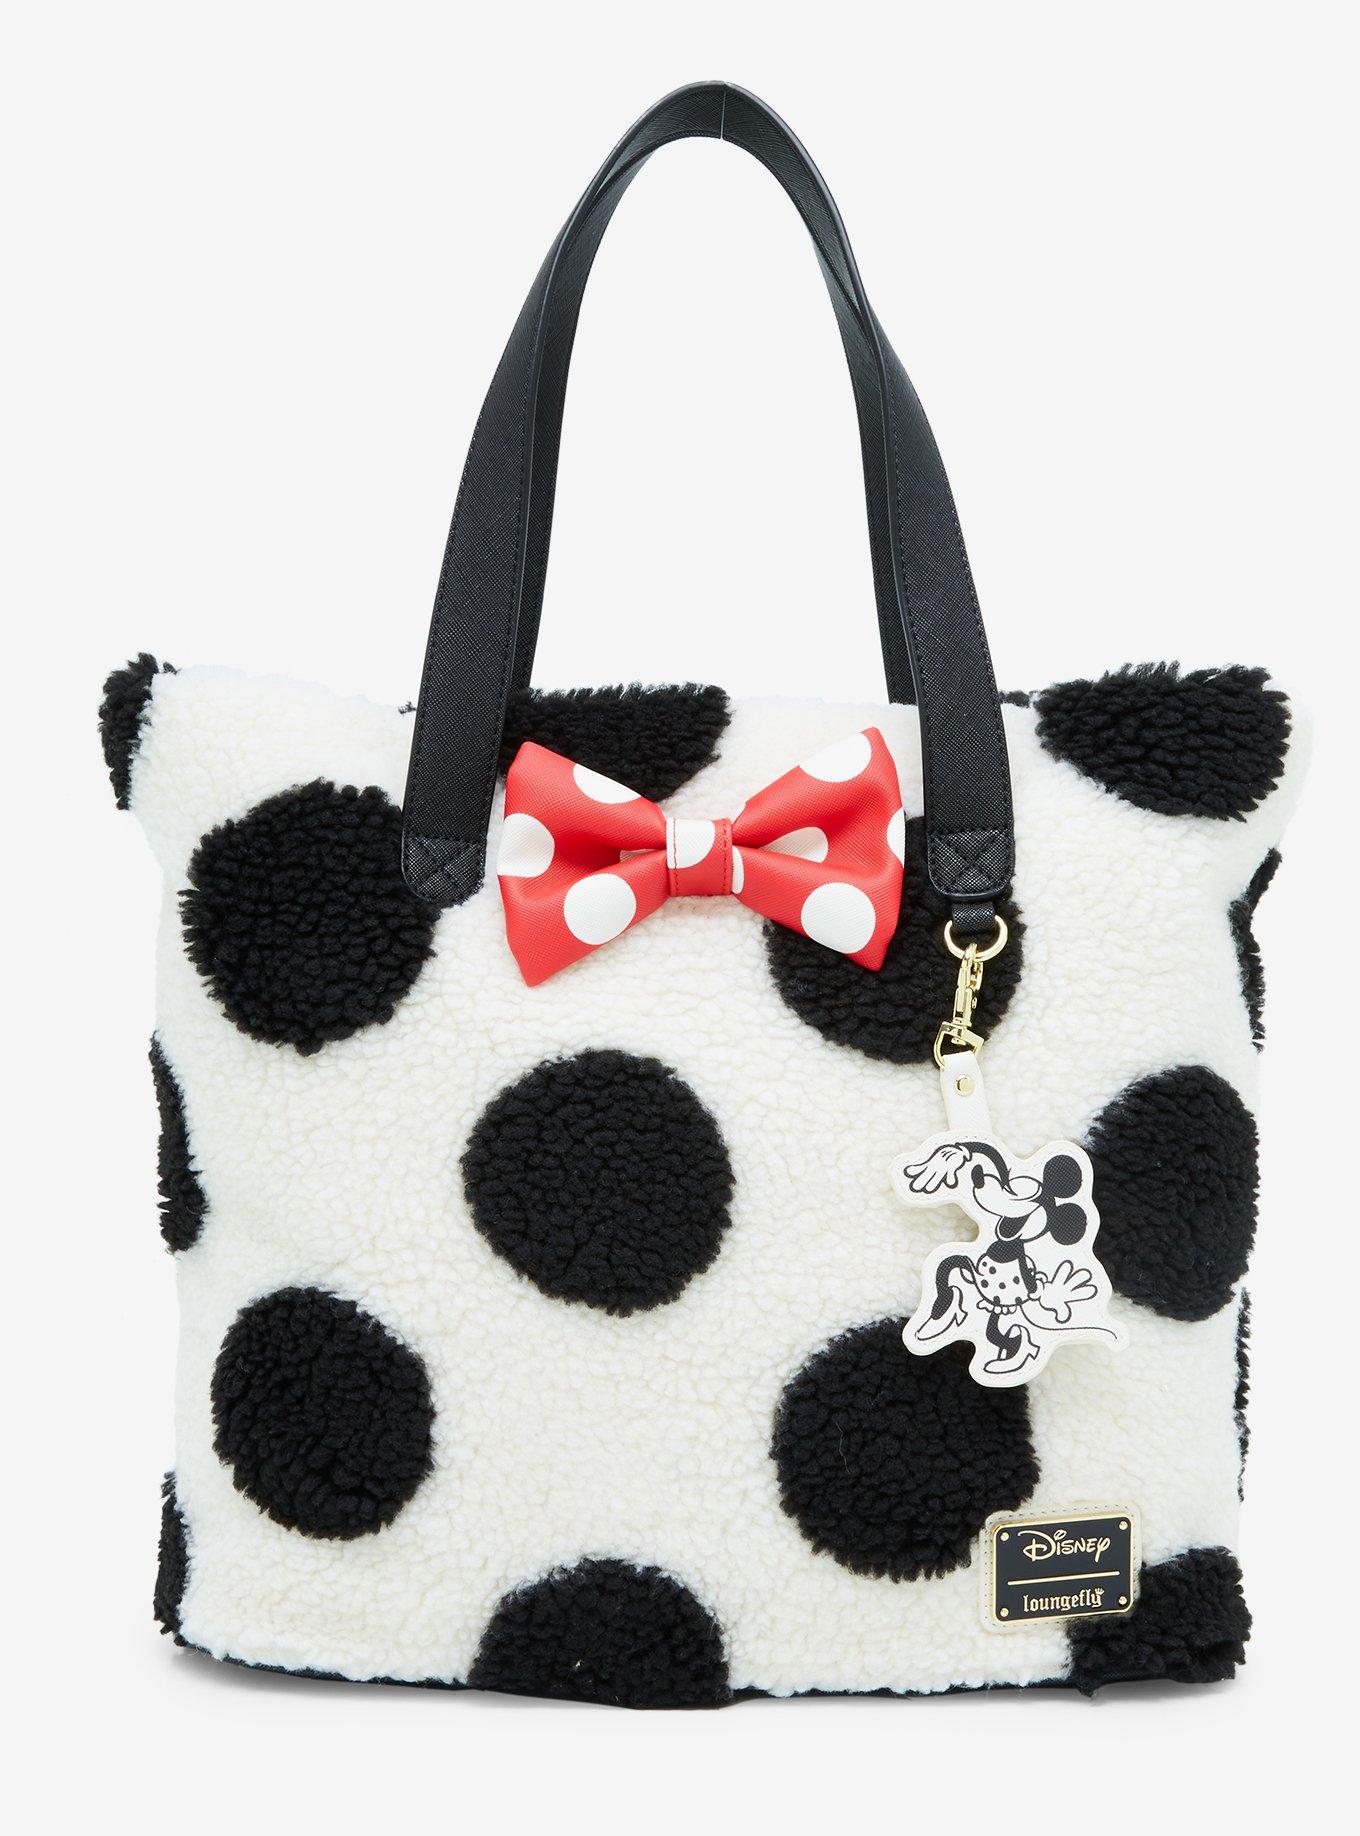 Loungefly Disney Minnie Mouse Black and White Polka Dot Sherpa Tote Bag, , hi-res